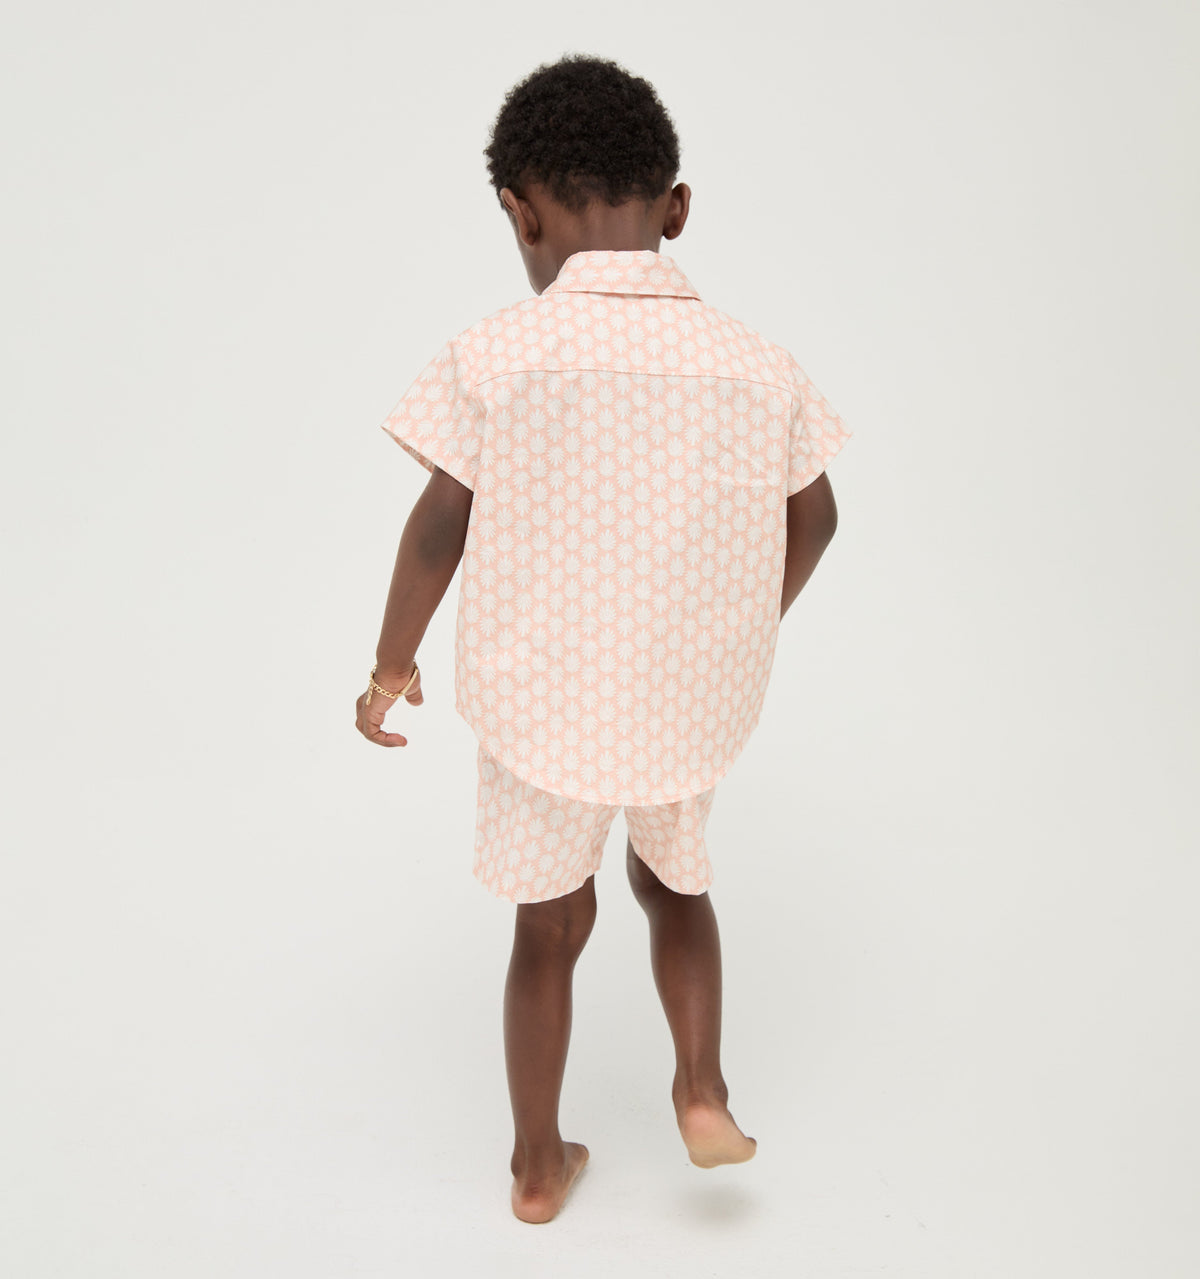 The Tiny Beau Shirt in Pale Coral Baroque Shell Cotton Sateen